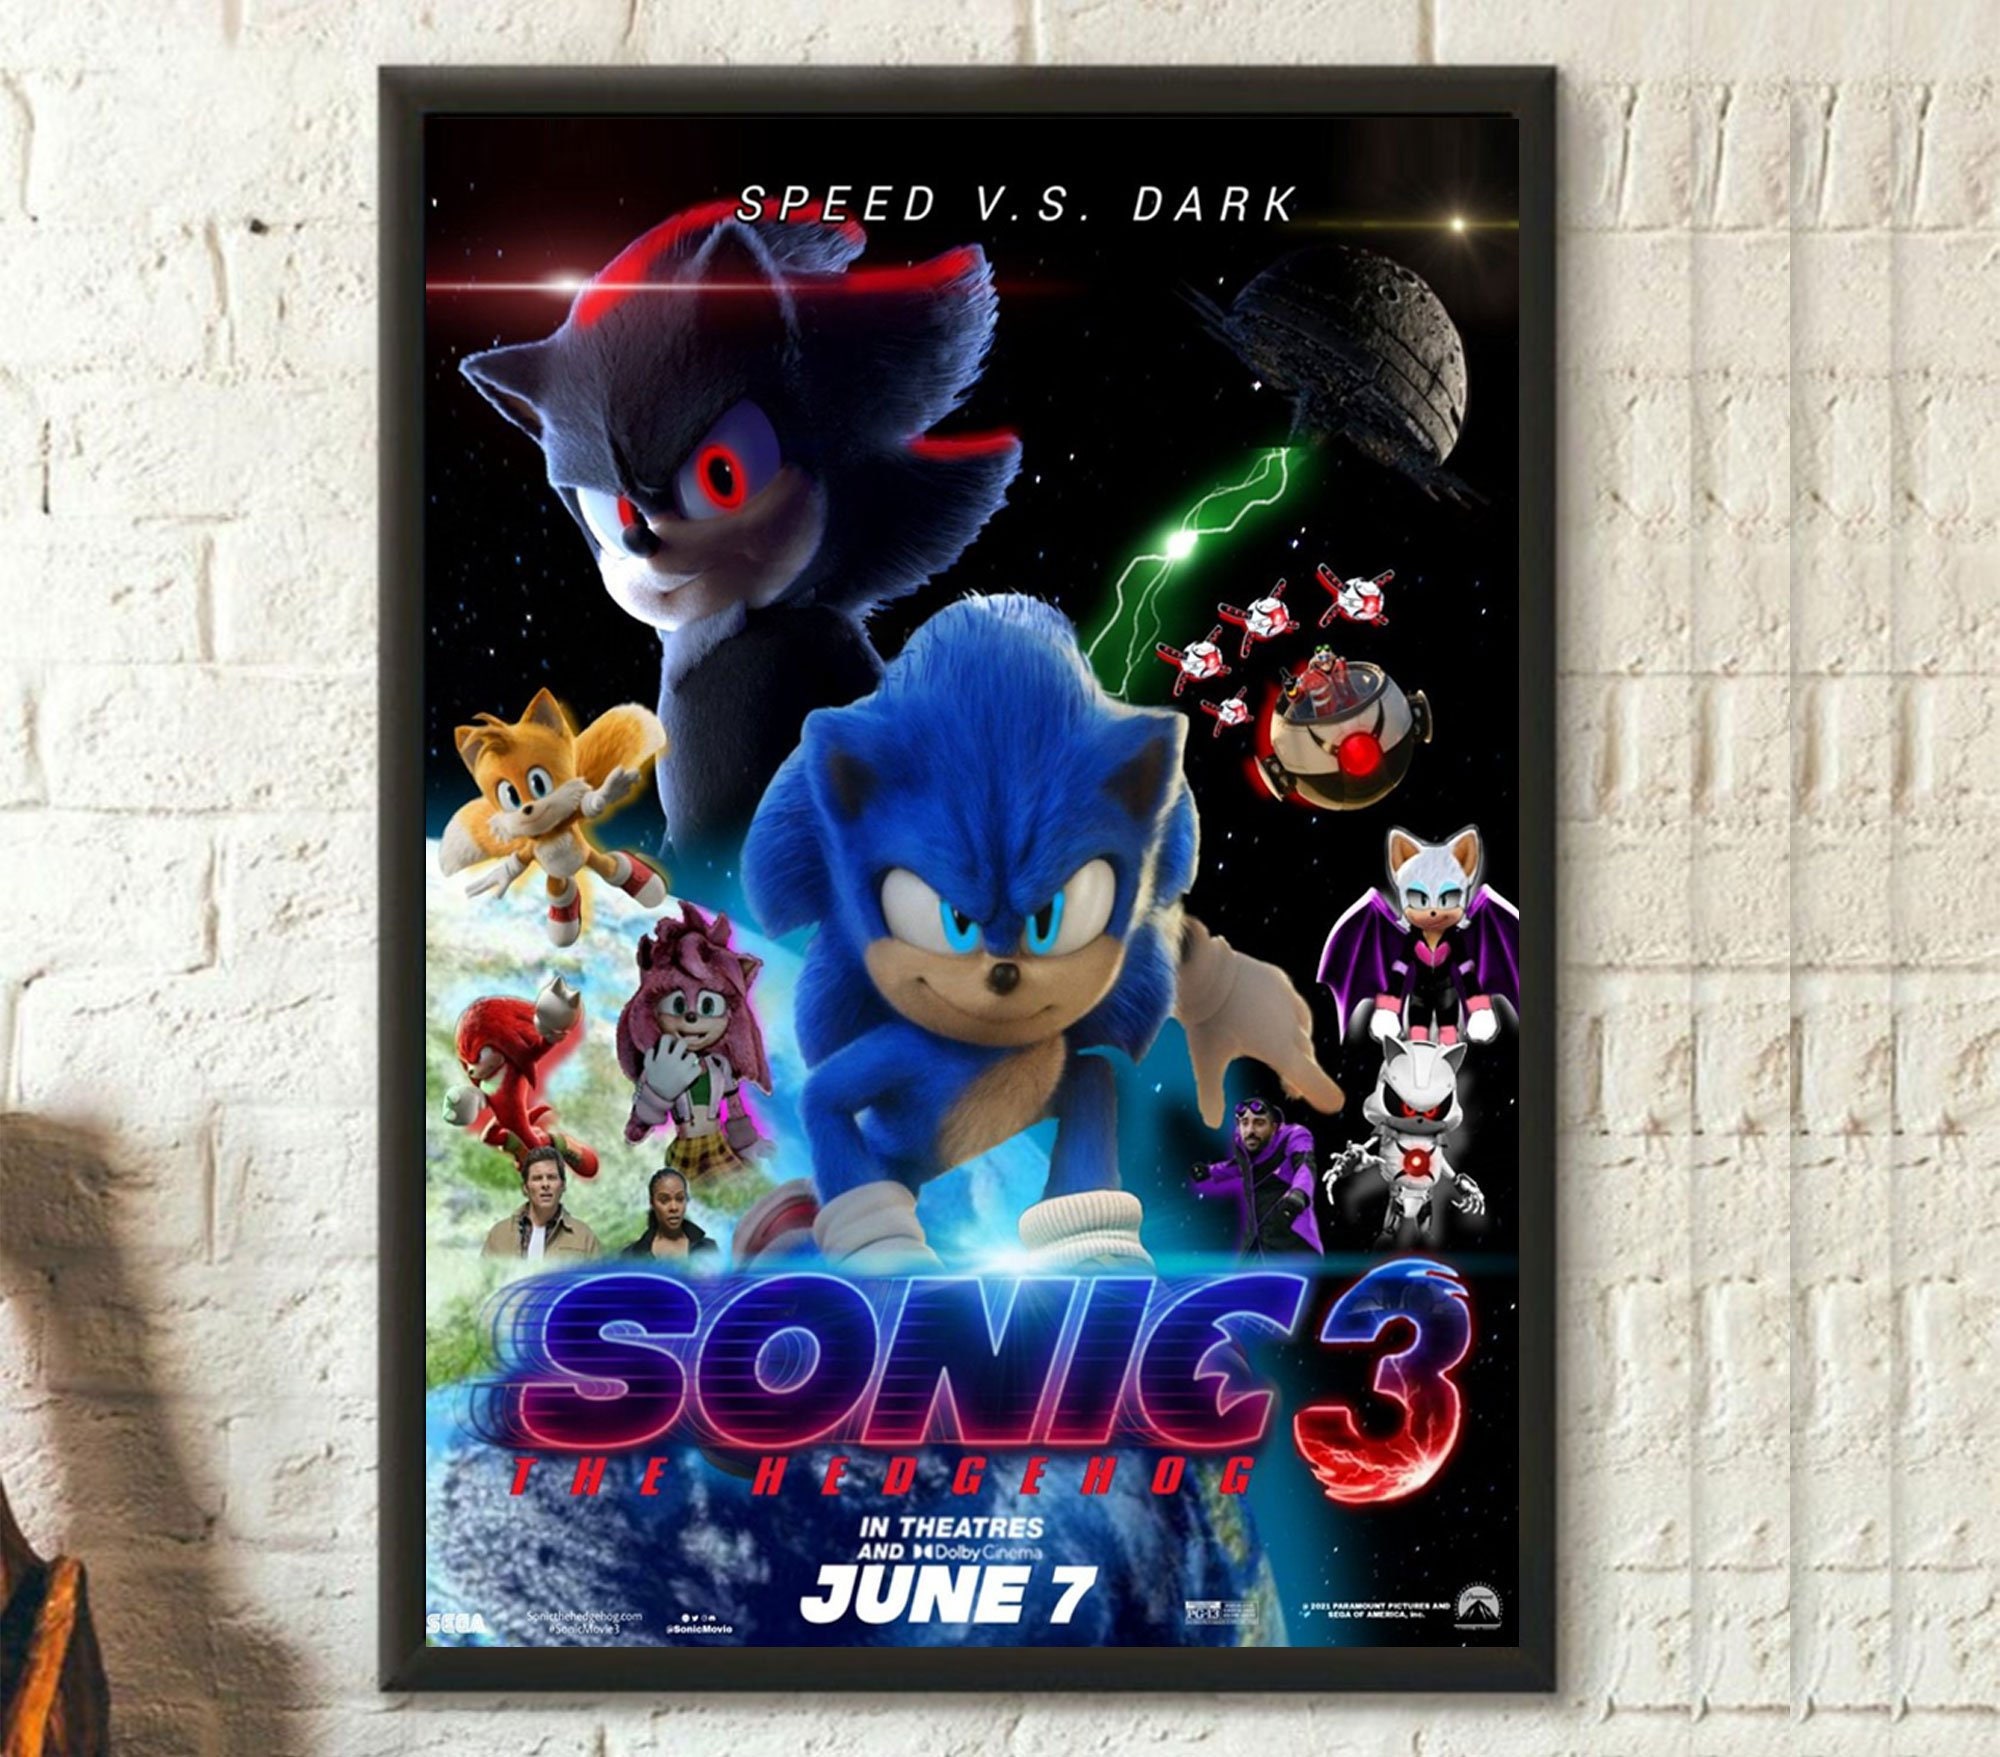 Sonic The Hedgehog 3 Poster